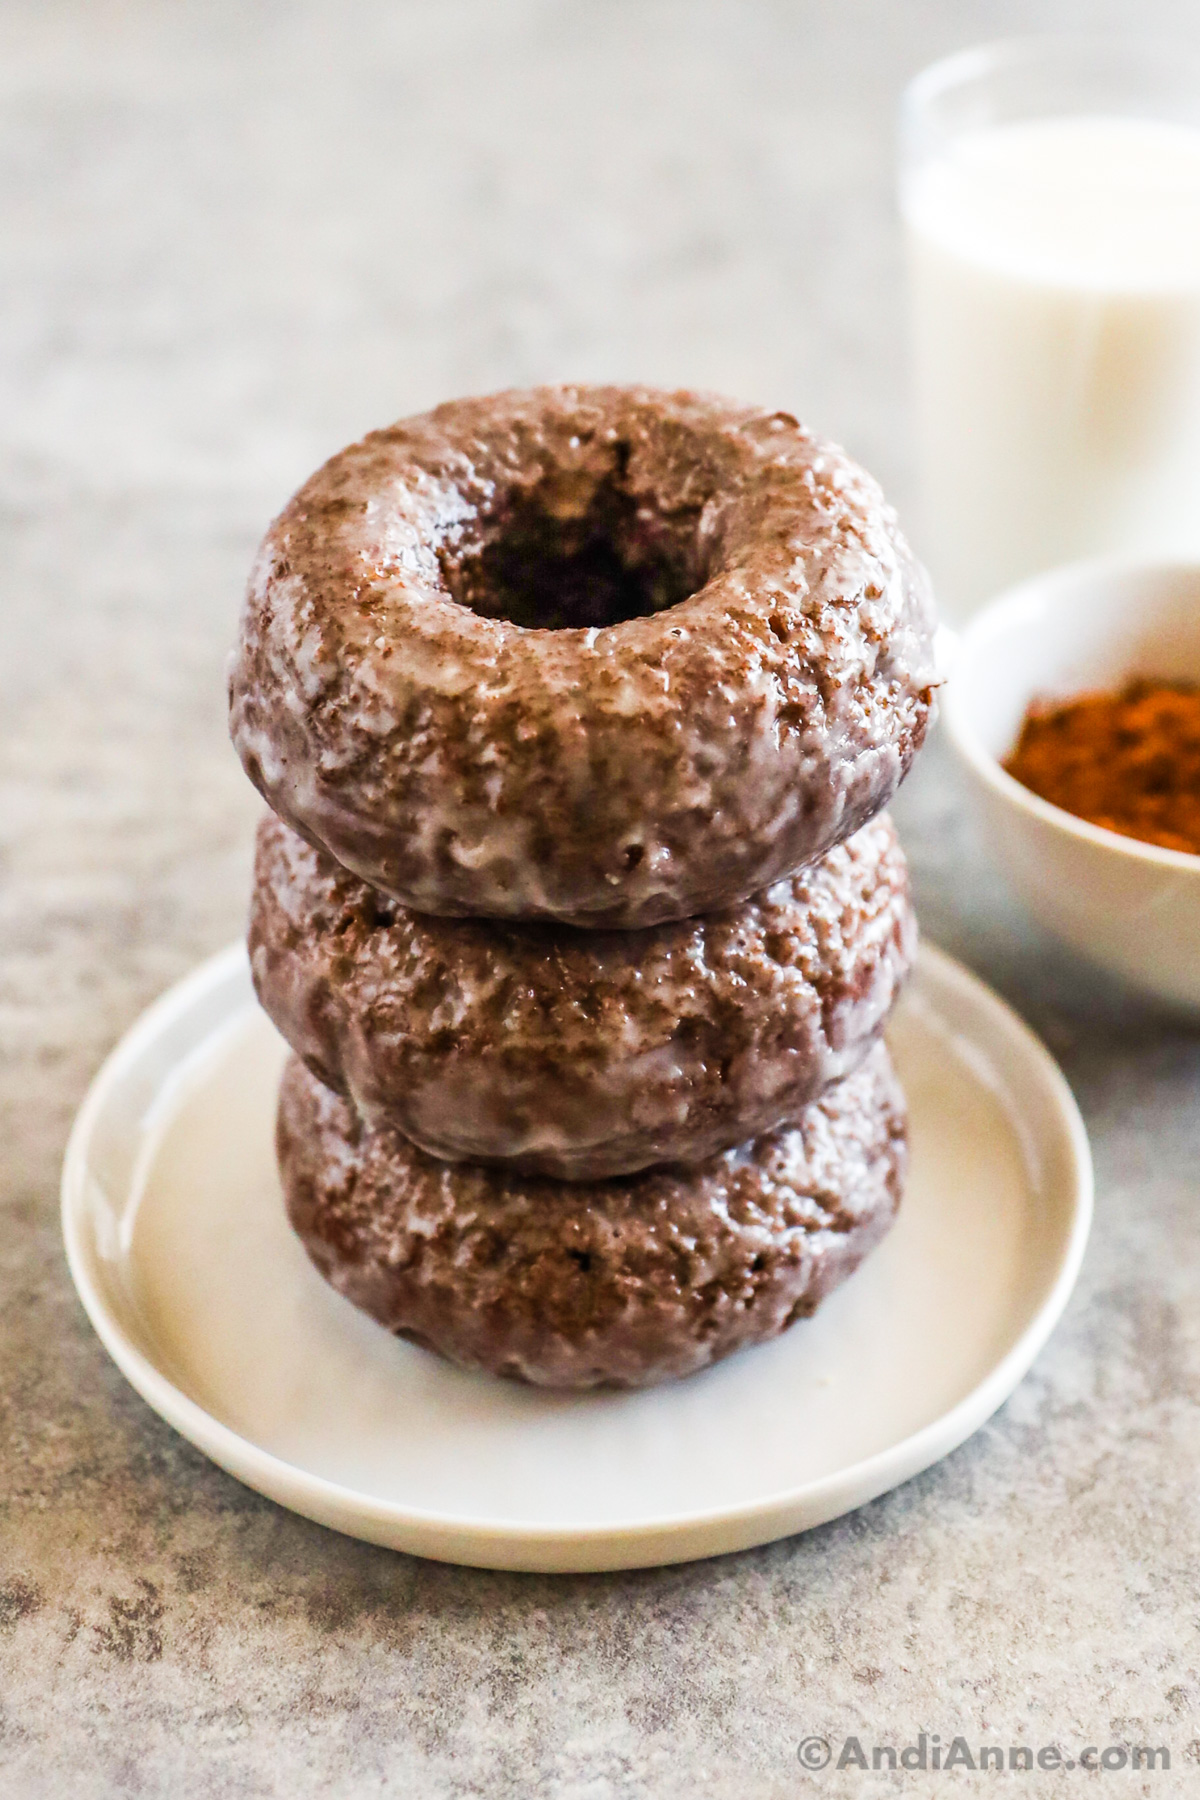 A stack of chocolate glazed donuts on a plate.